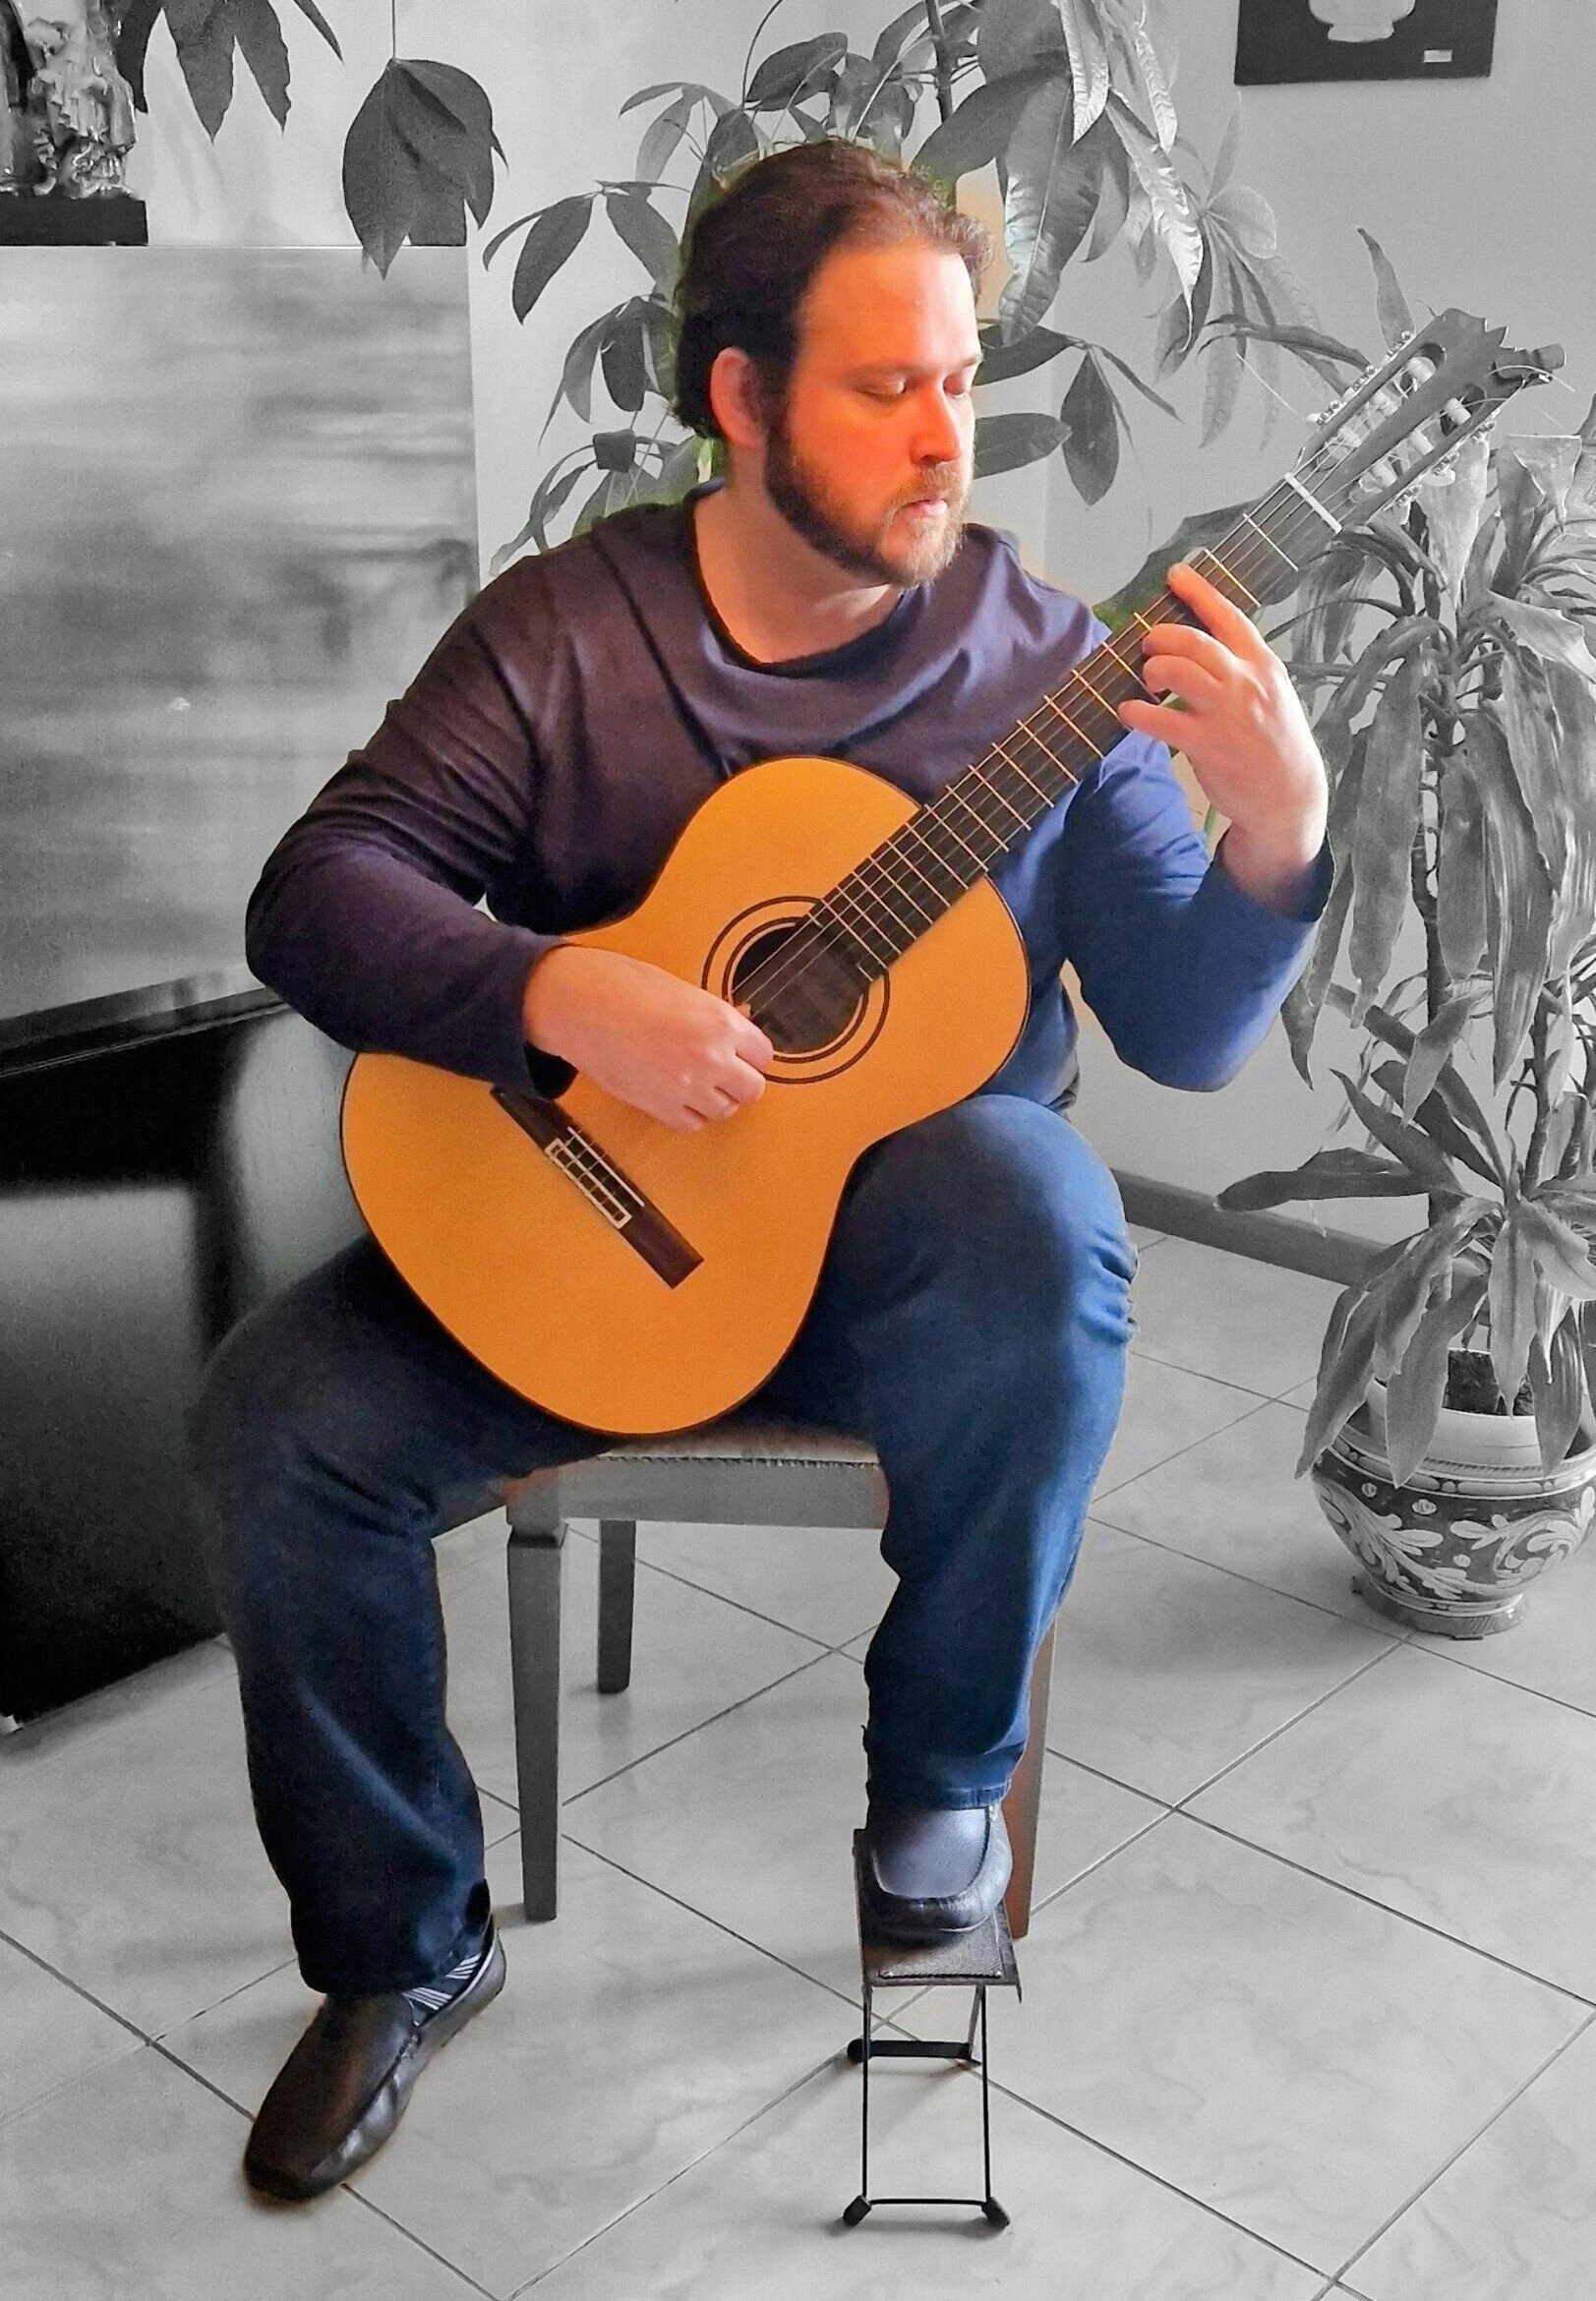 Giuseppe Bonaccorso while playing classical guitar: the instrument that expresses in the best way the poetry of music!